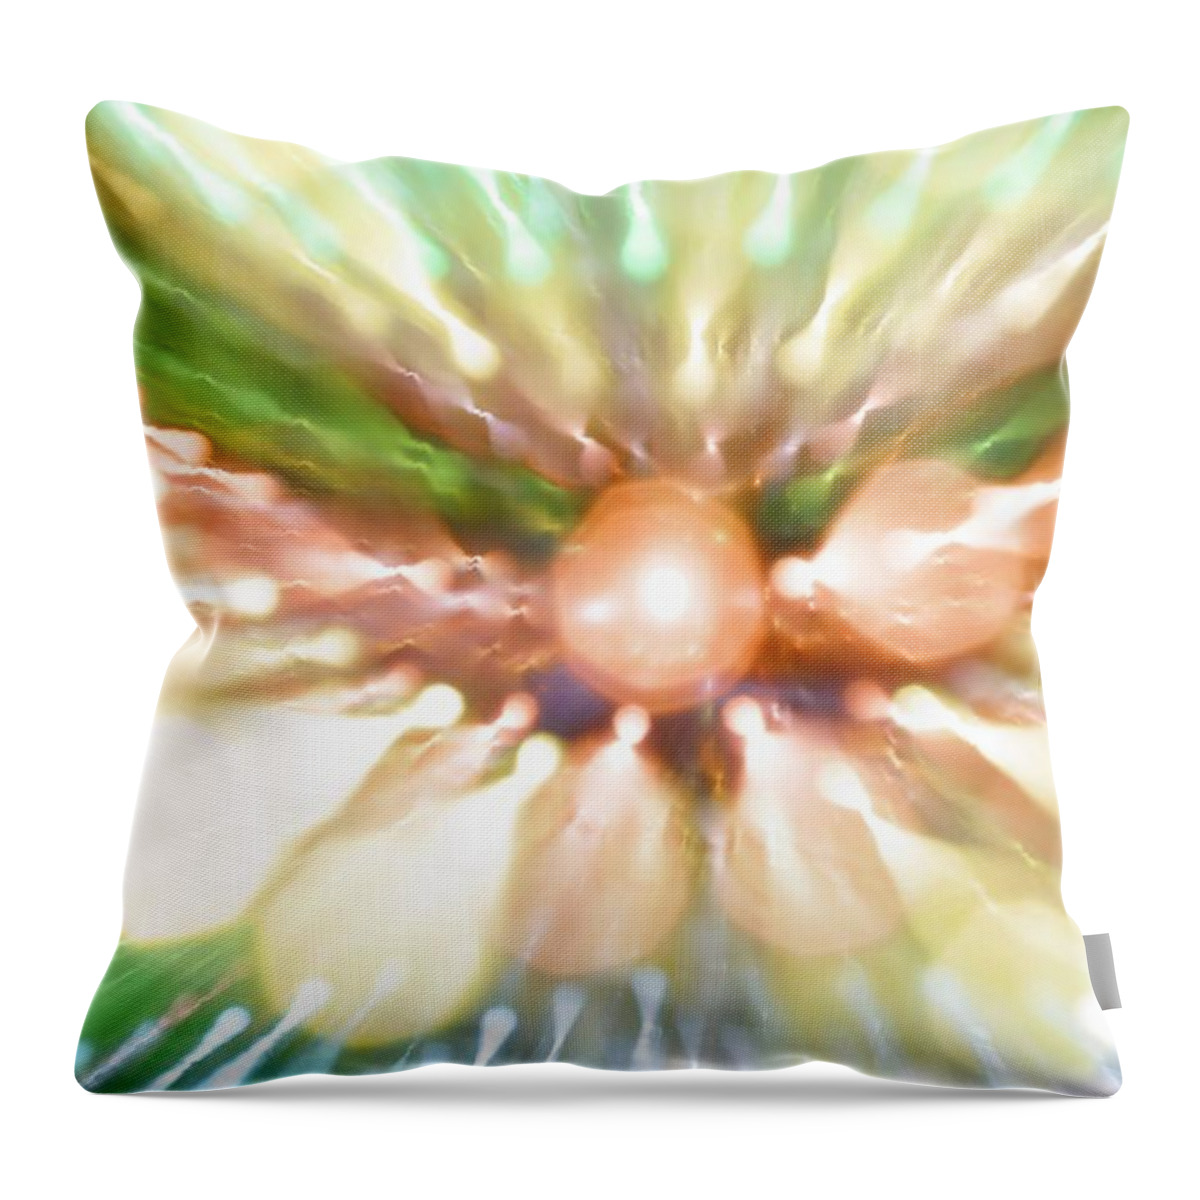 Abstract Throw Pillow featuring the photograph Suicide Blonde by Dazzle Zazz